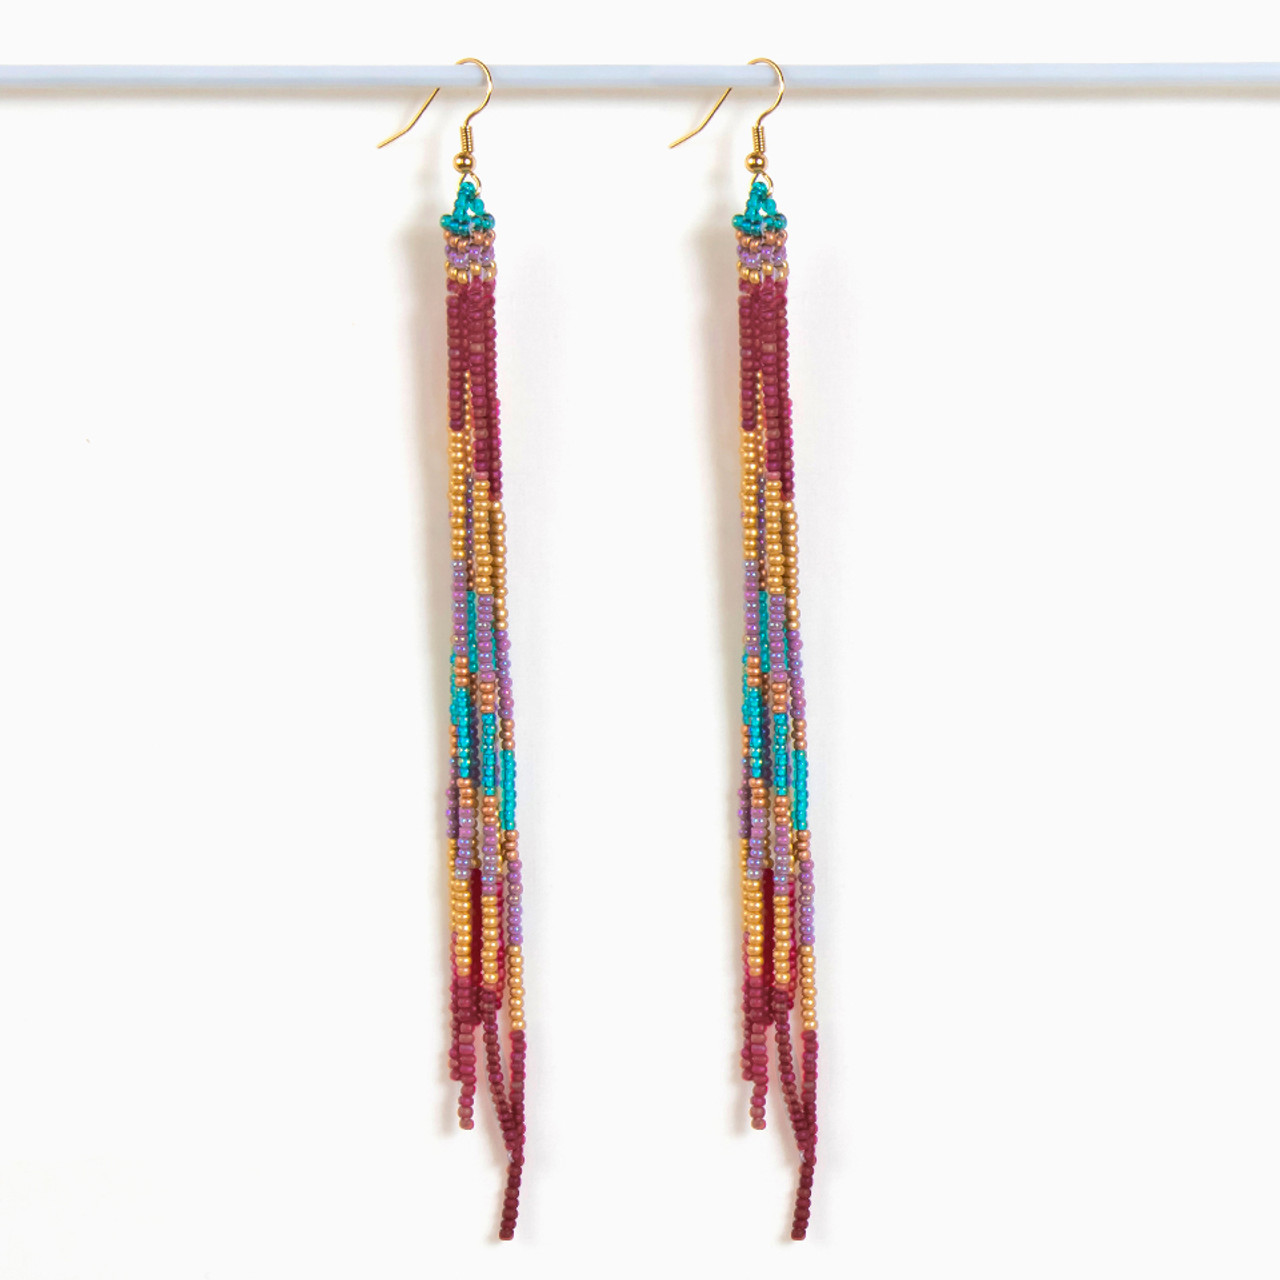 Guatemalan Ombre Beaded Fringe Earring, Handmade Fair Trade Products